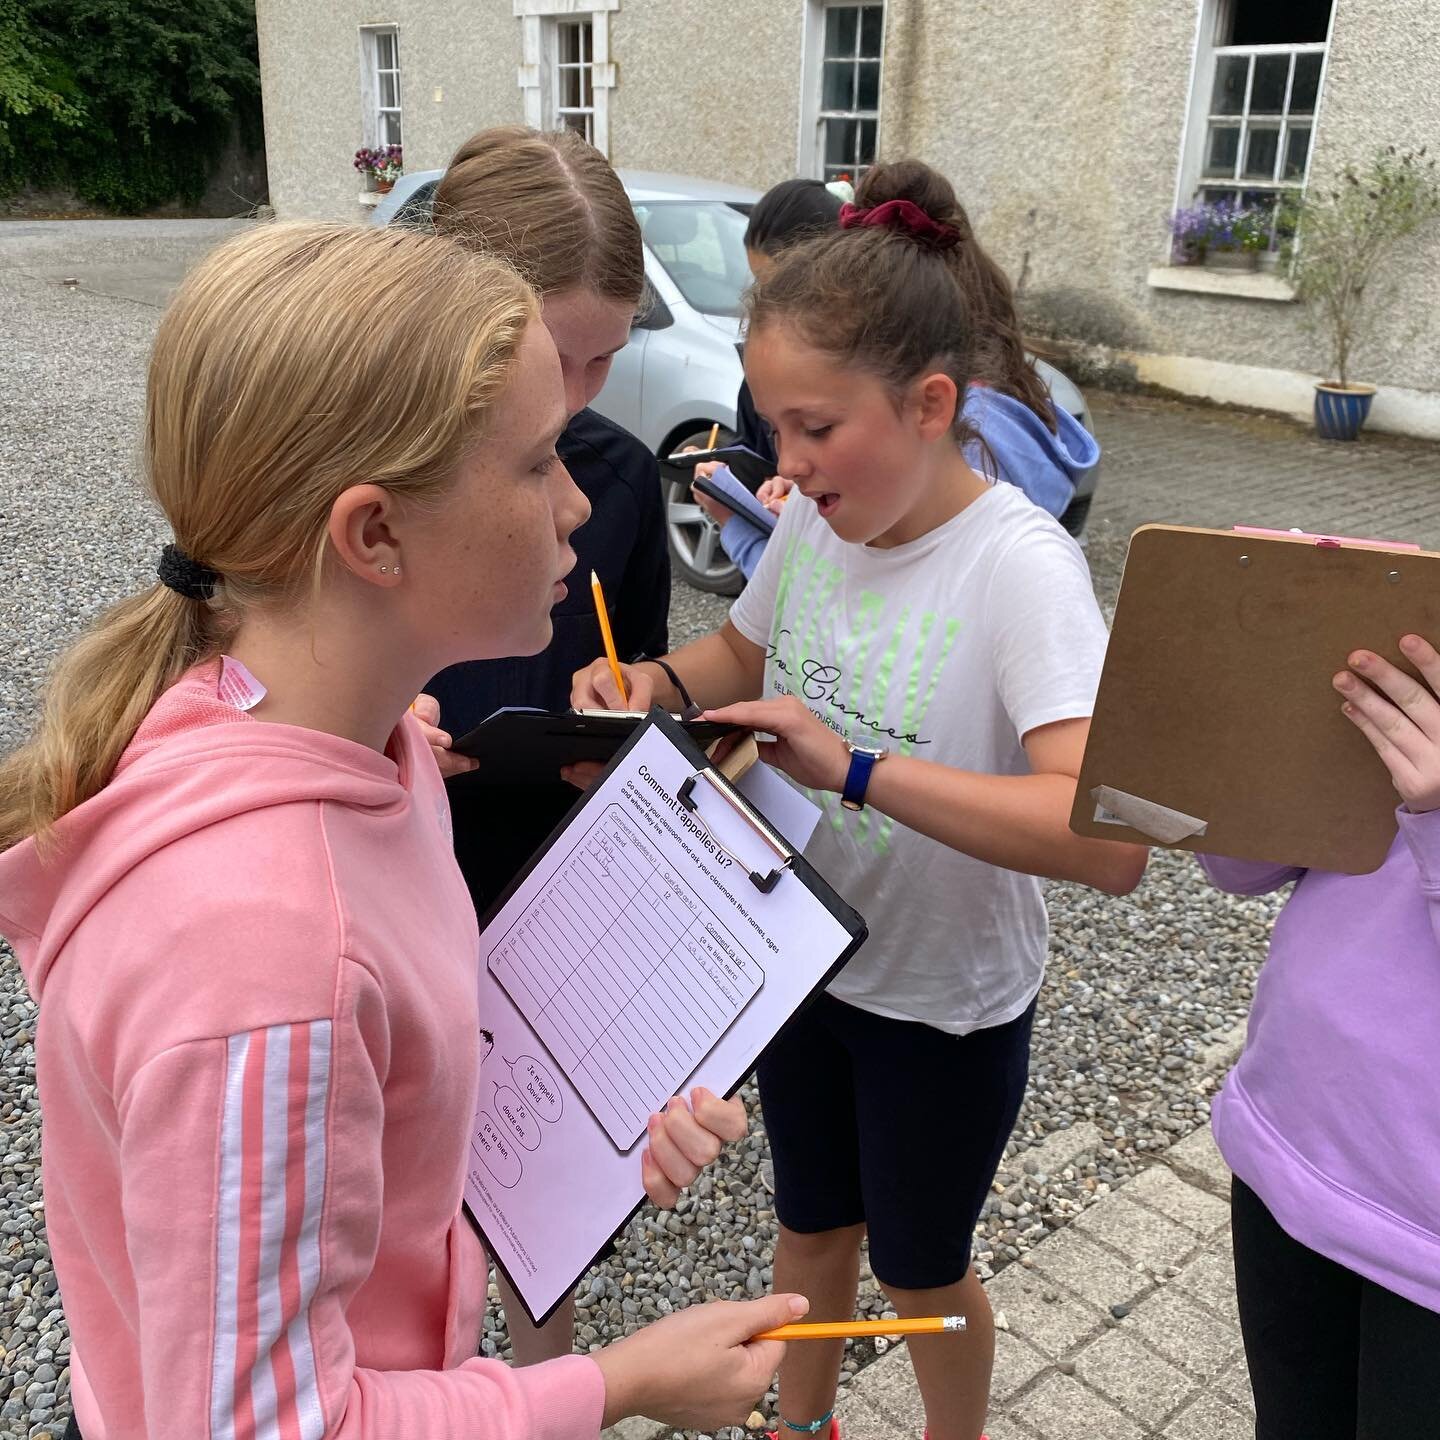 Un petit sondage&hellip;.. a great way to get the students taking to each other&hellip;🇫🇷✅❤️.
.
.
,
,
#communication #teambuilding #hhlschool #kildare #summercampireland #fran&ccedil;ais #apprendrefran&ccedil;ais #imparareinglese #languageschool #s